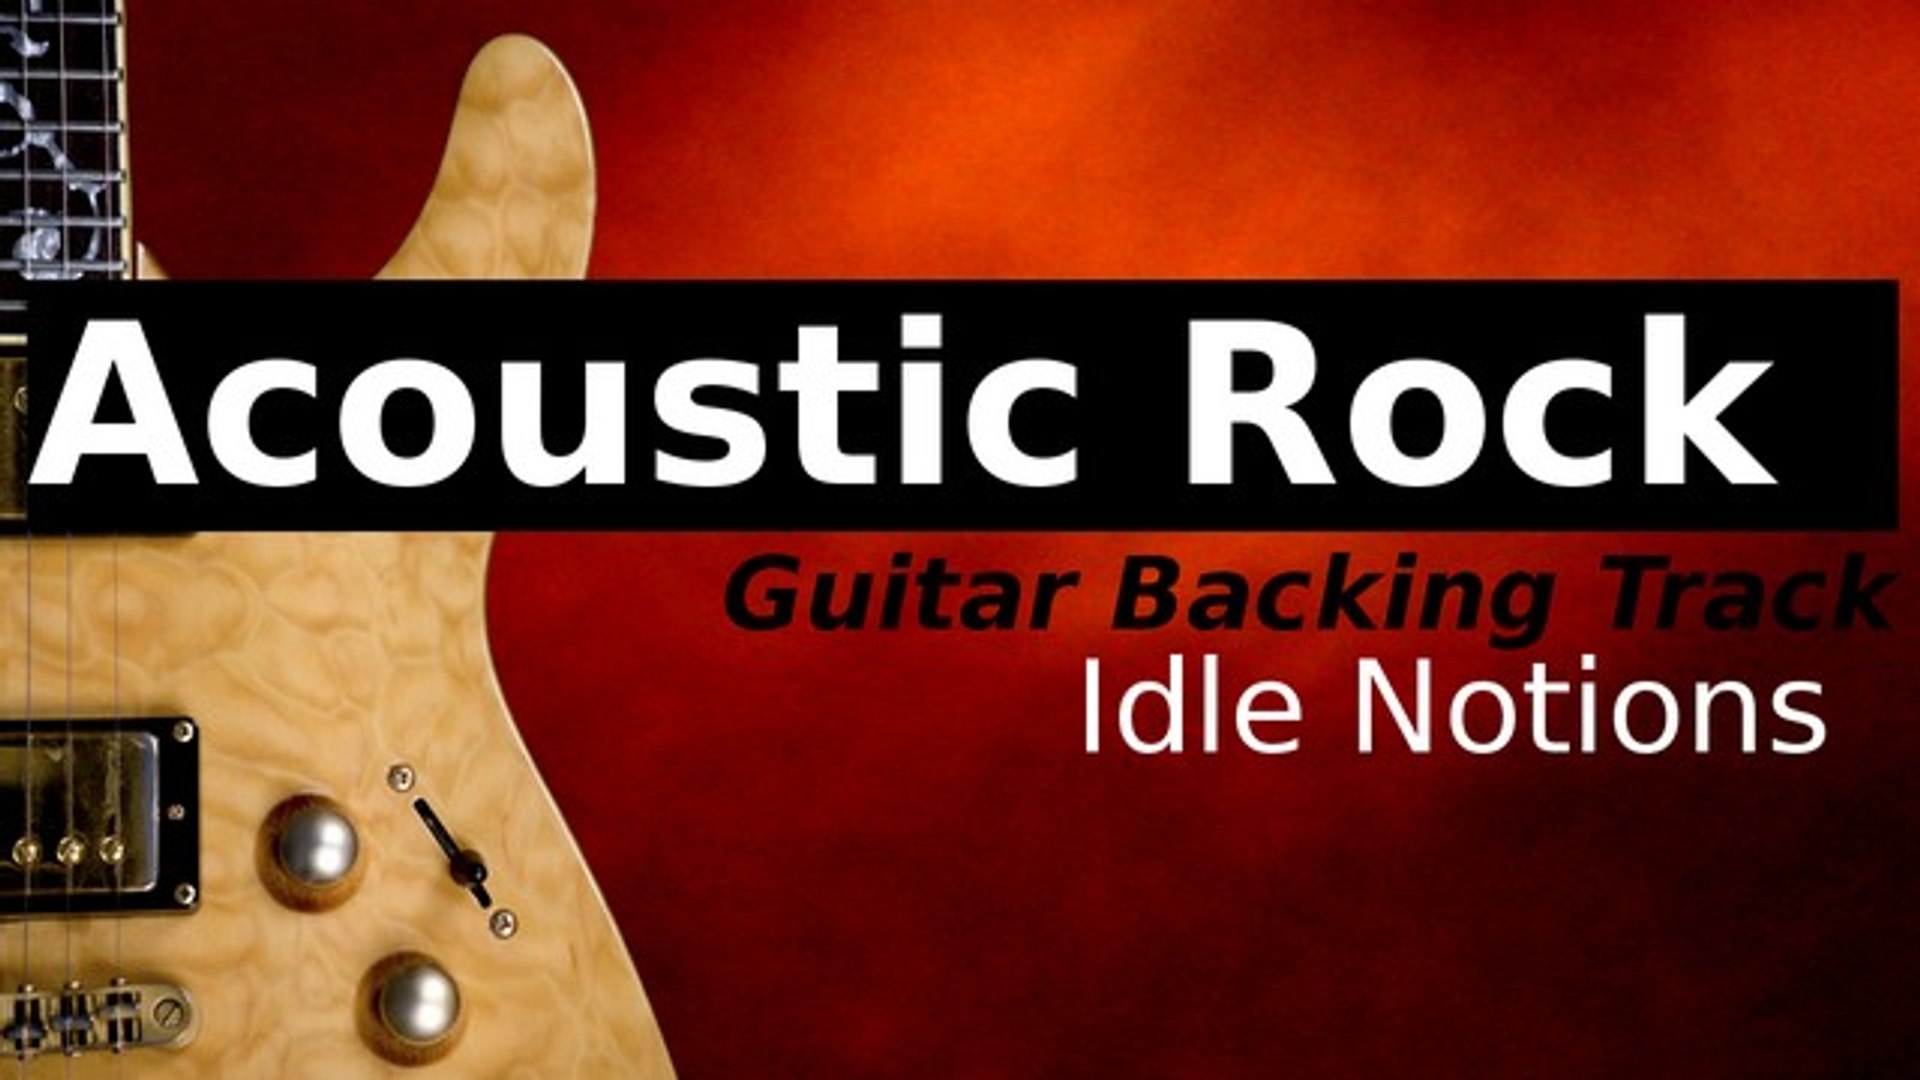 Acoustic Folk Rock Backing Track for Guitar in D Major - Idle Notions -  video Dailymotion